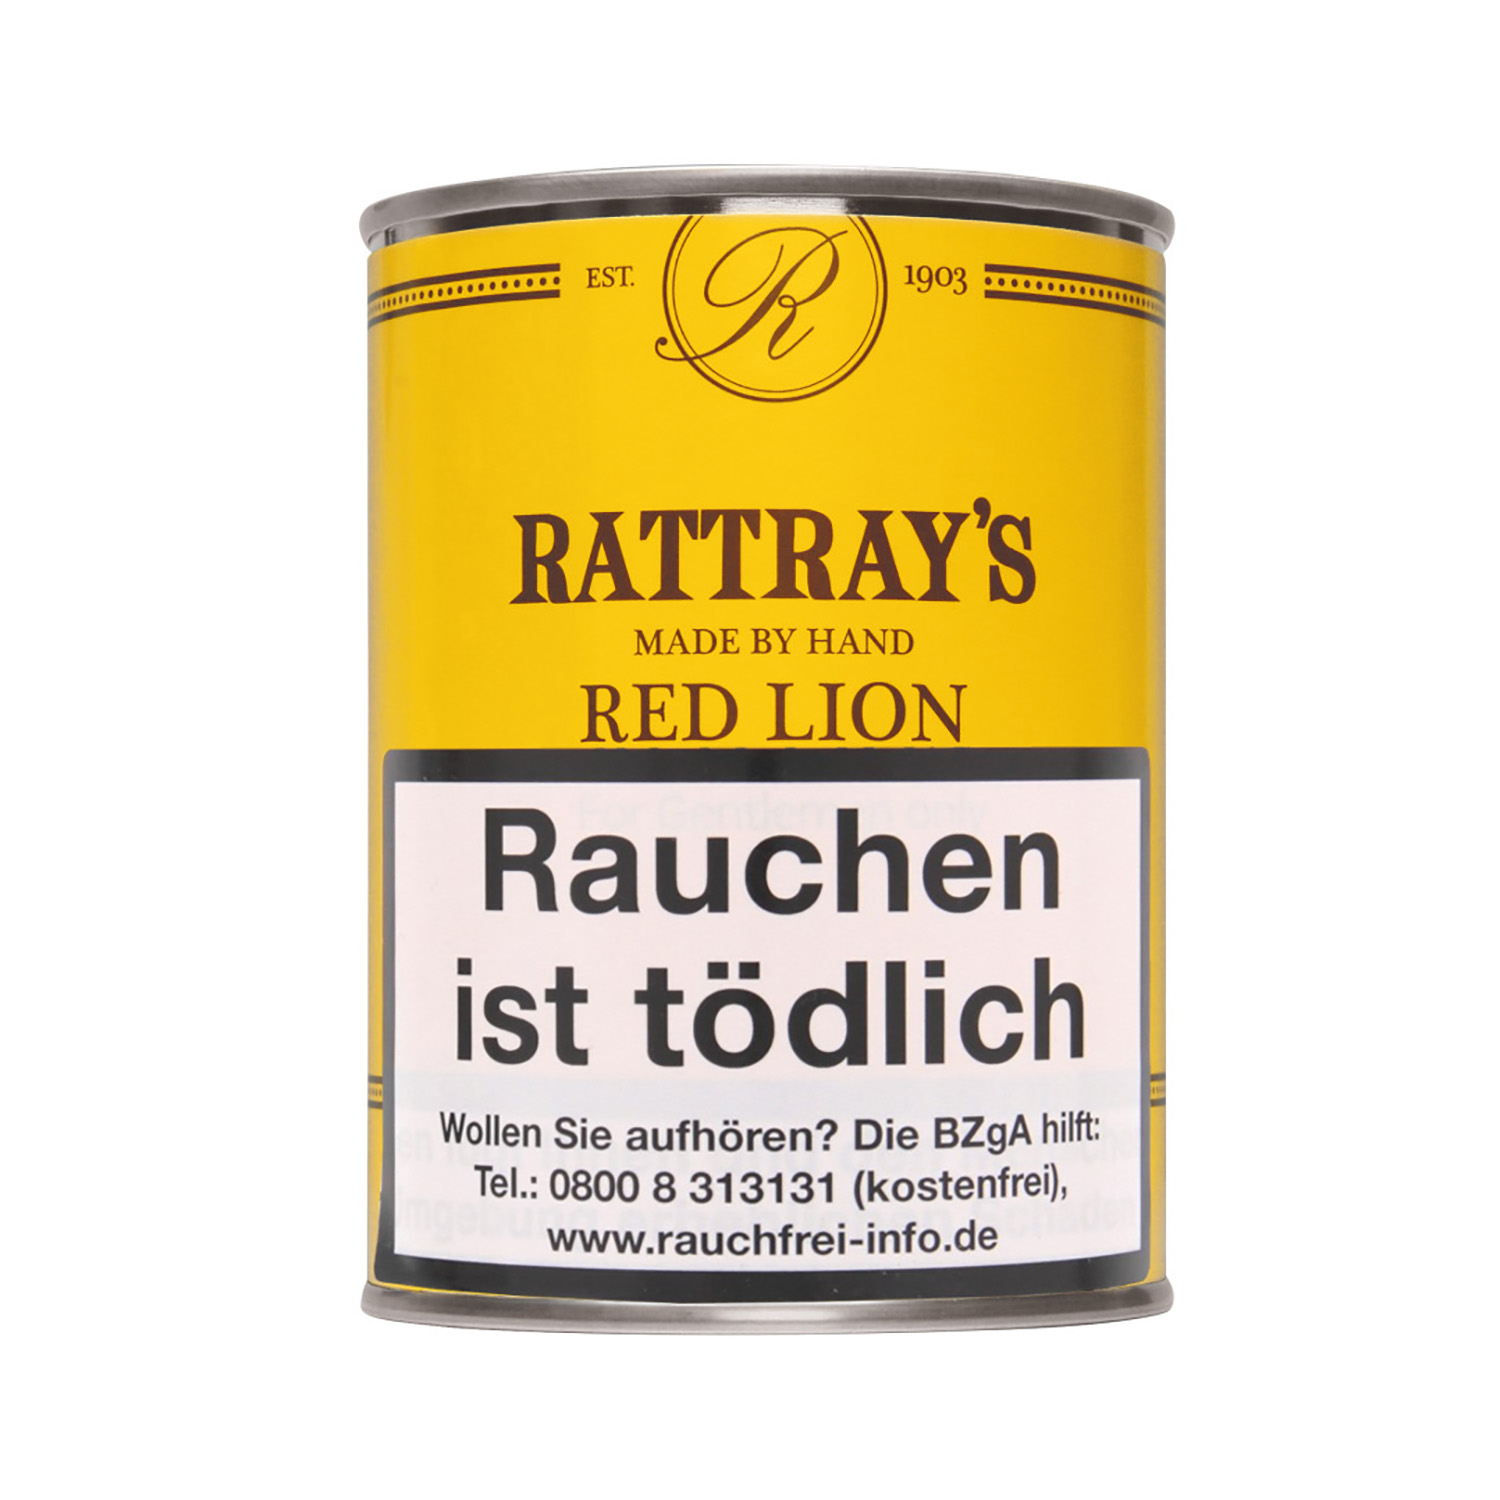 Rattray's Red Lion 100g